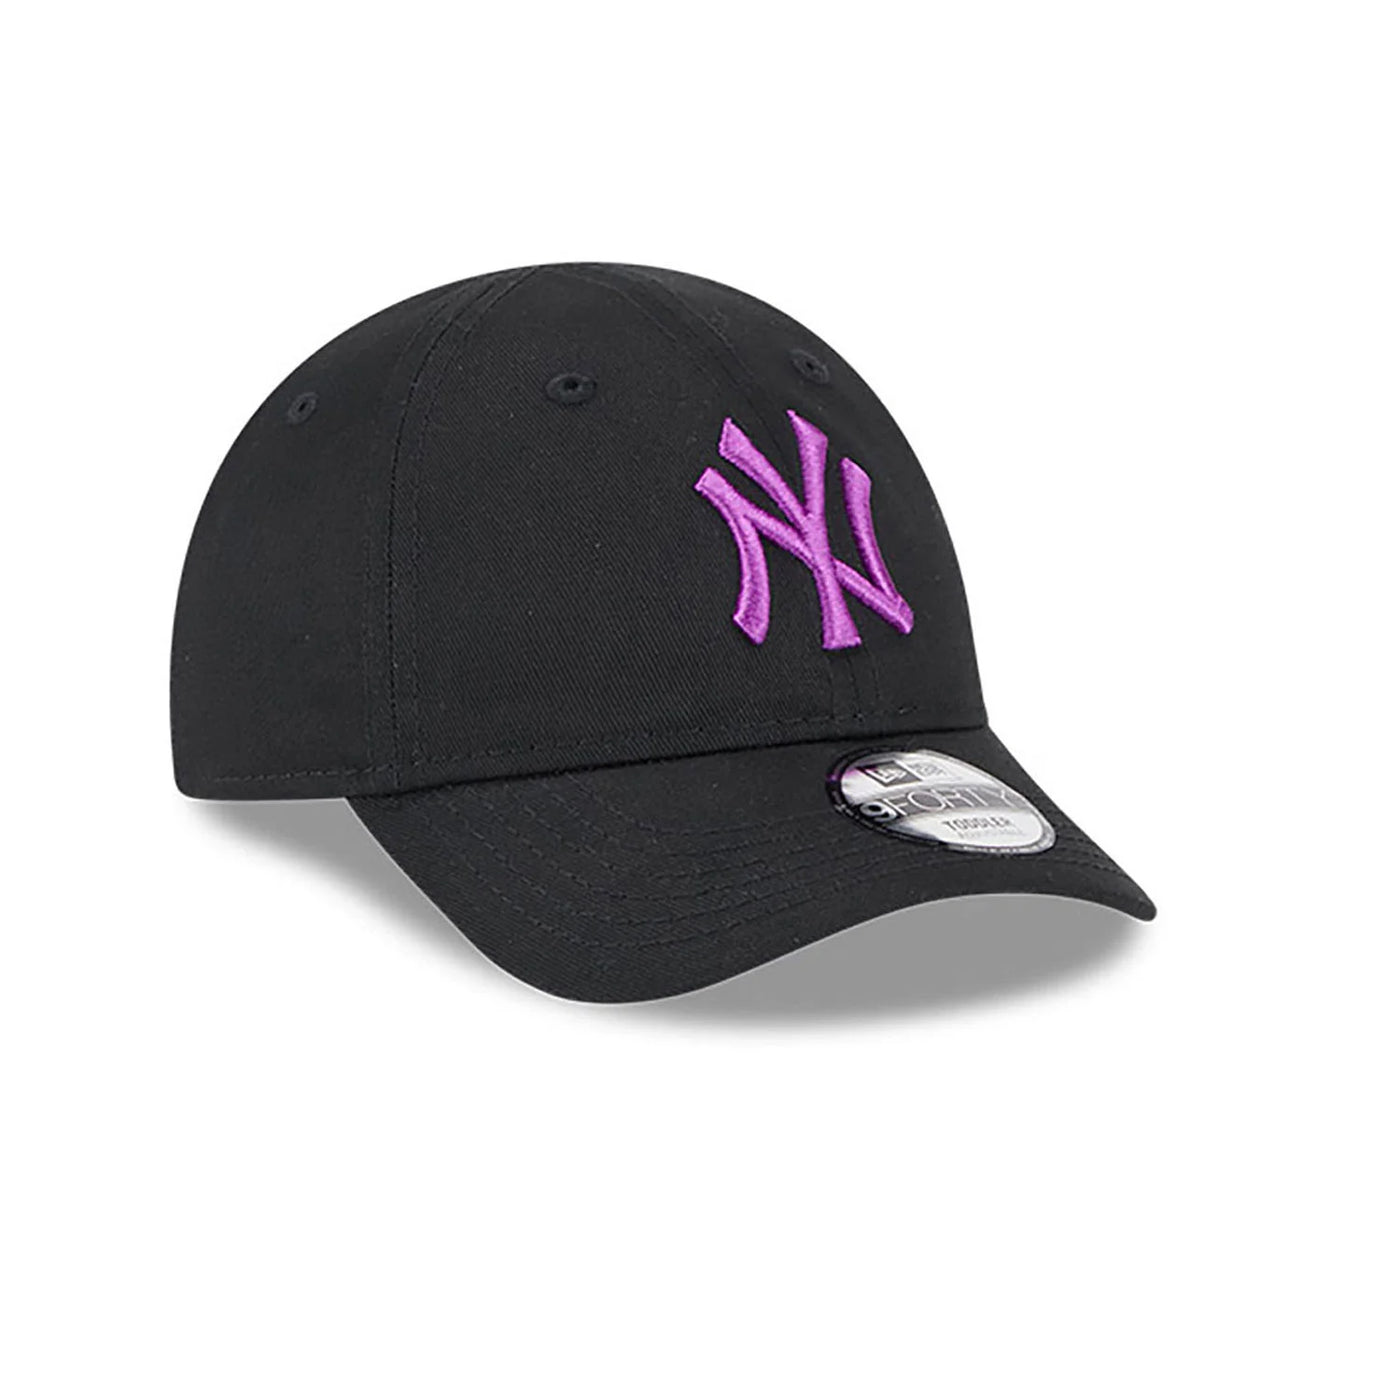 CAPPELLO 9FORTY NEW YORK YANKEES LEAGUE ESSENTIAL NEW ERA BAMBINA